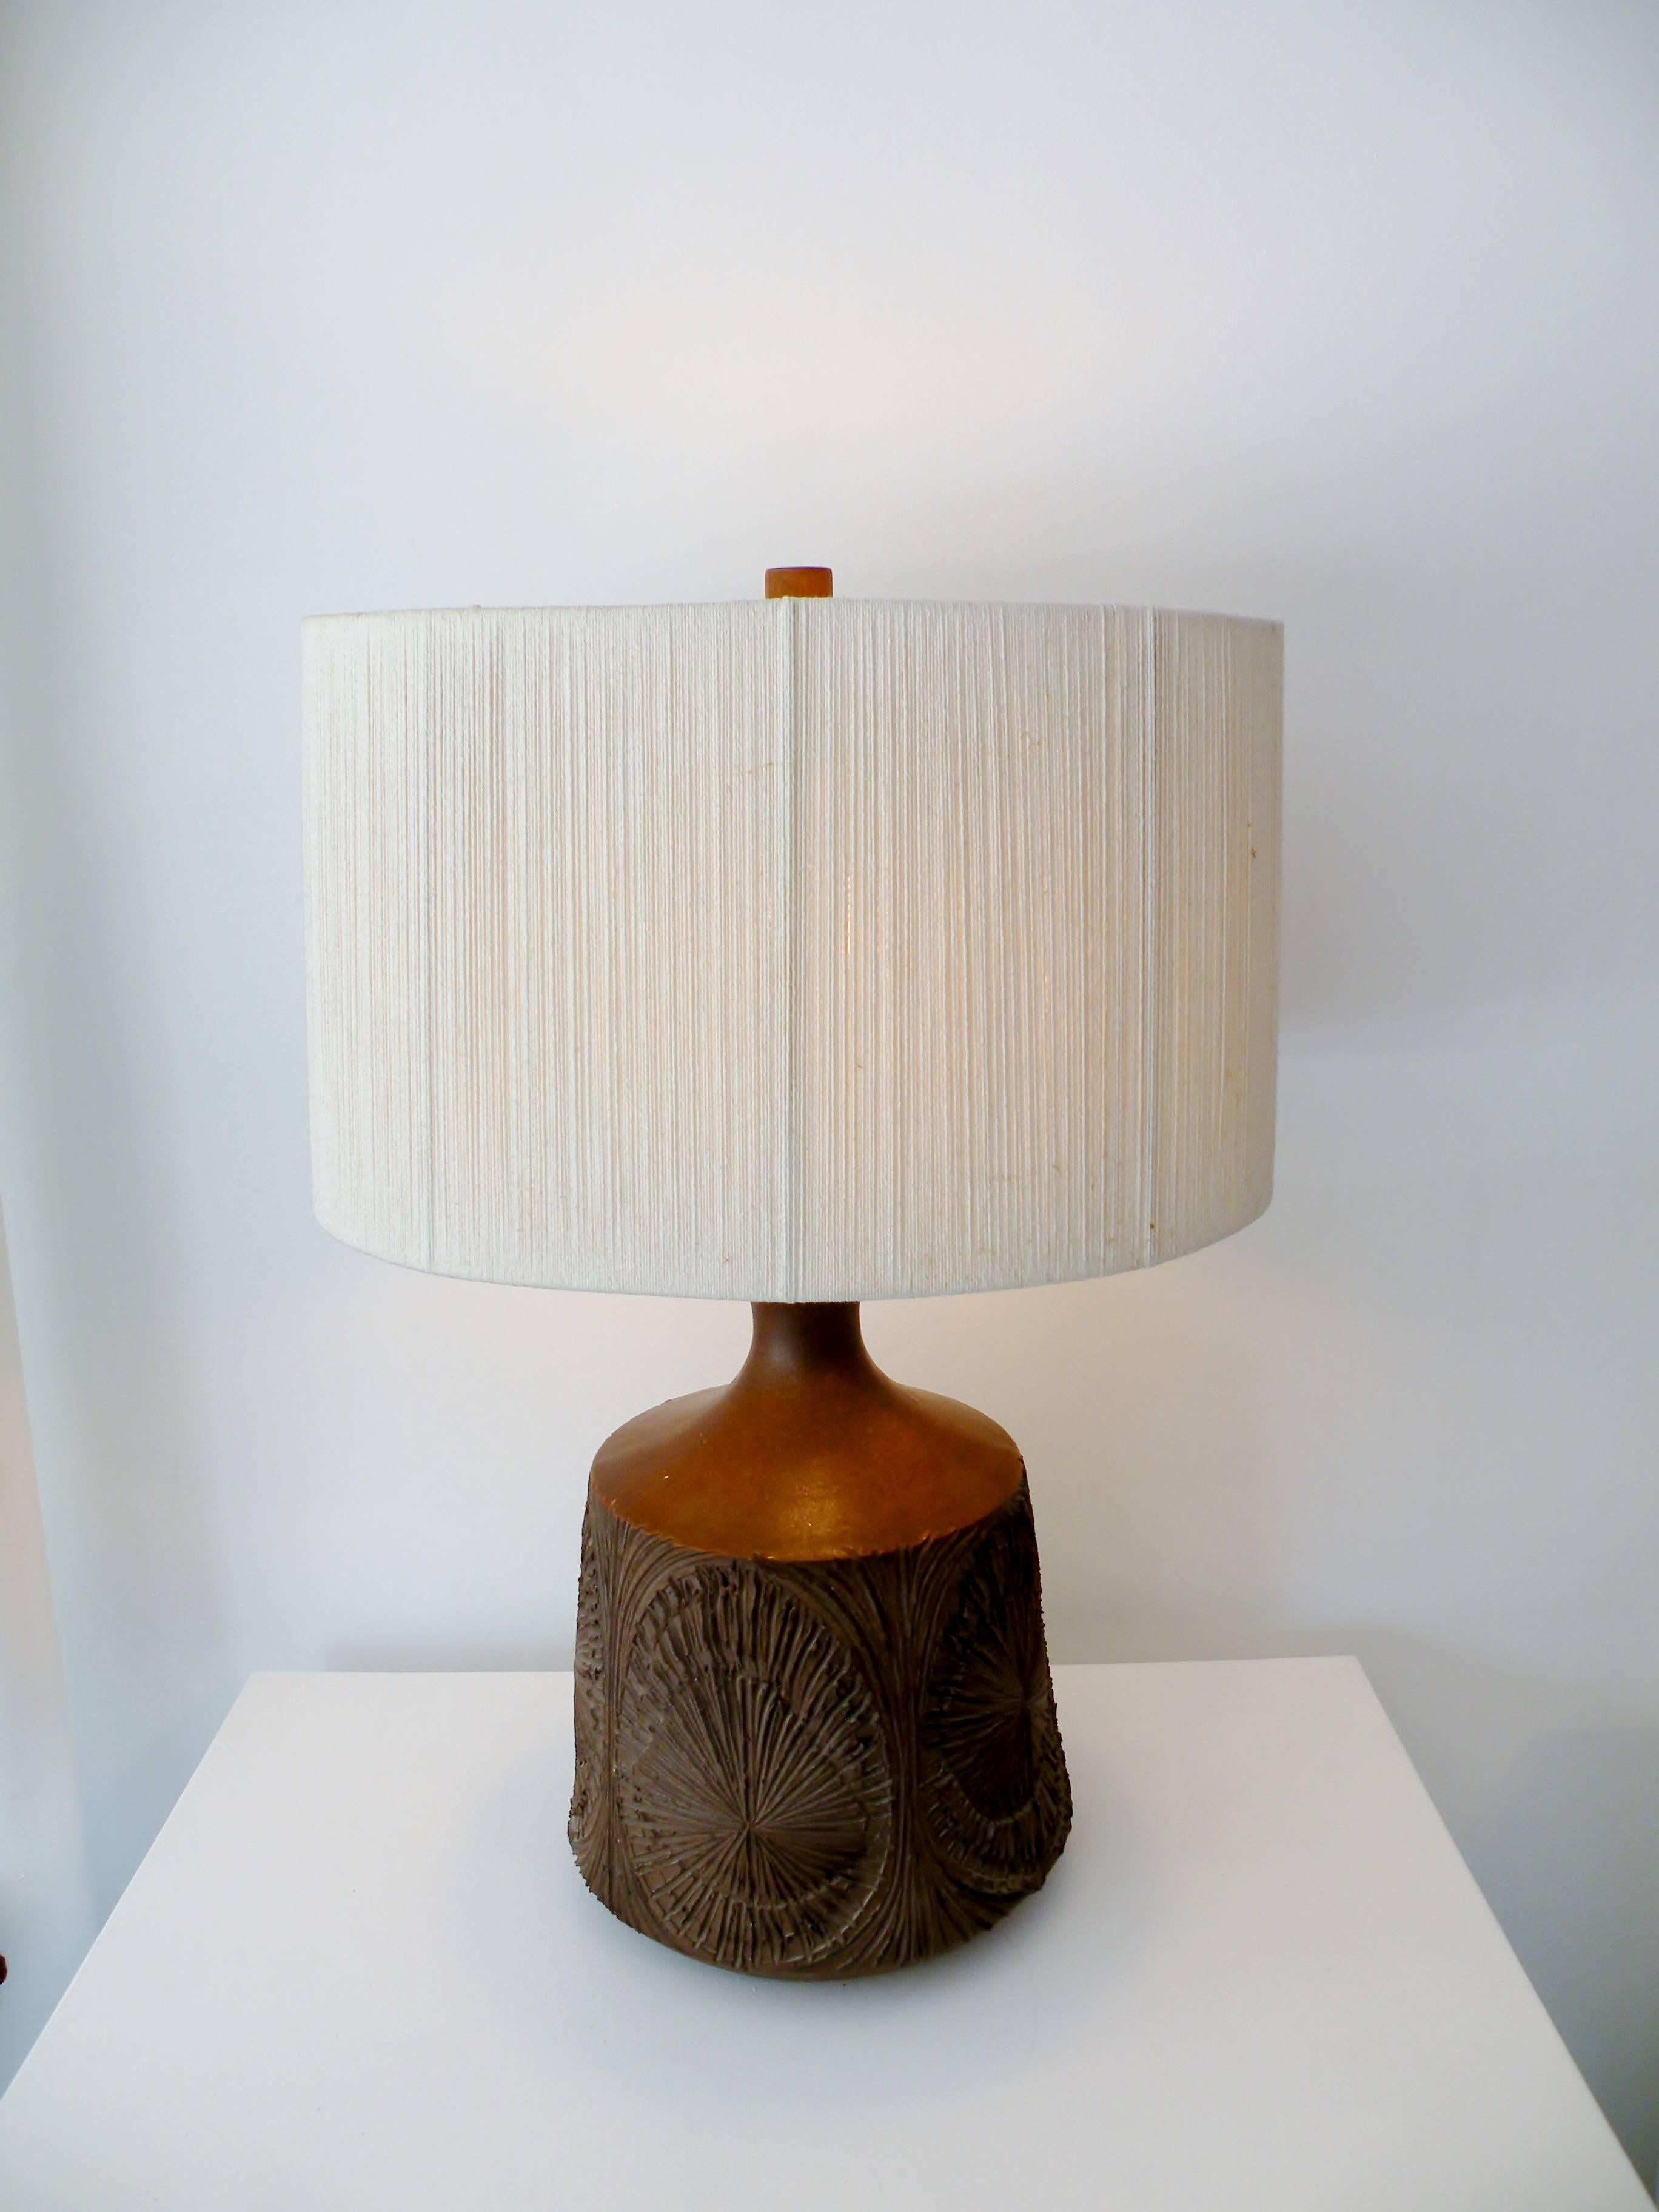 Striking Mid-Century David Cressey & Robert Maxwell sgraffito decorated studio art pottery table lamp from their workshop, Earthgender. Body of lamp measures 15